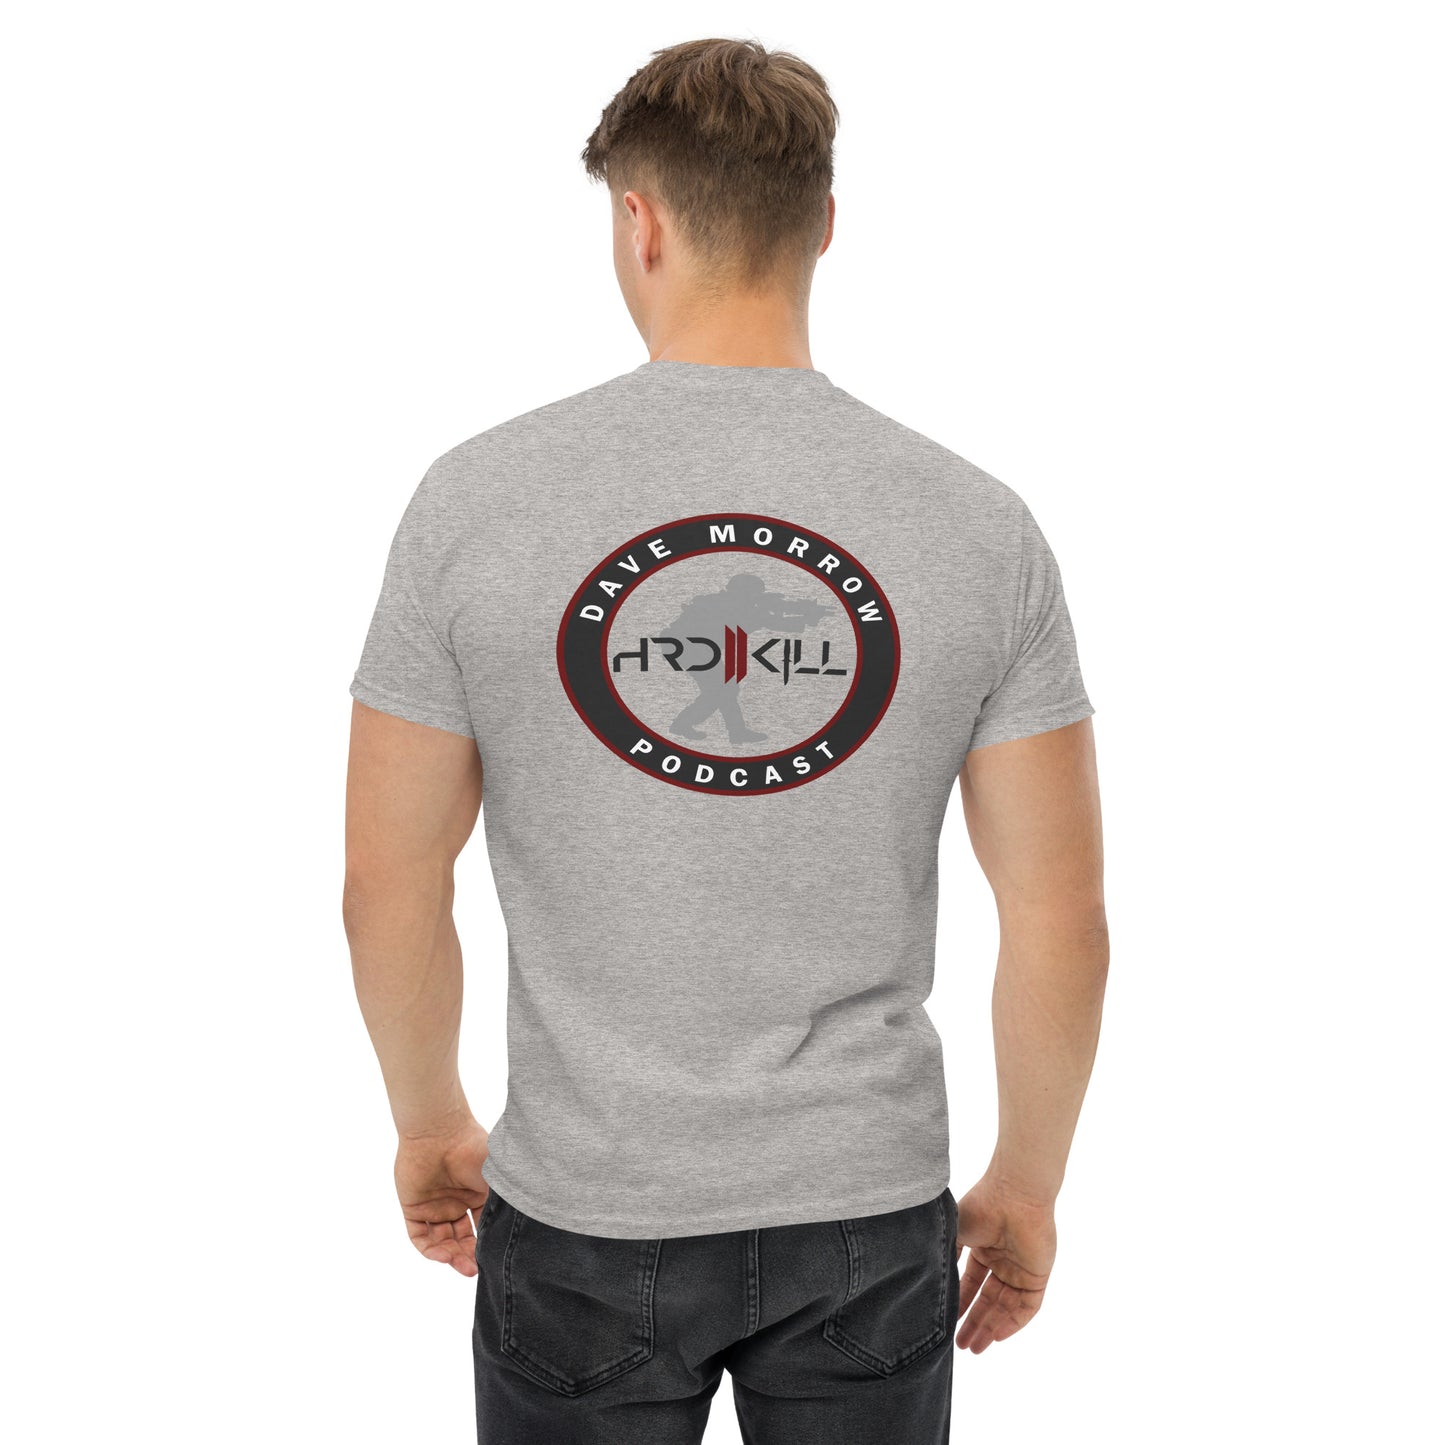 Support the Canadian 329 Classic T